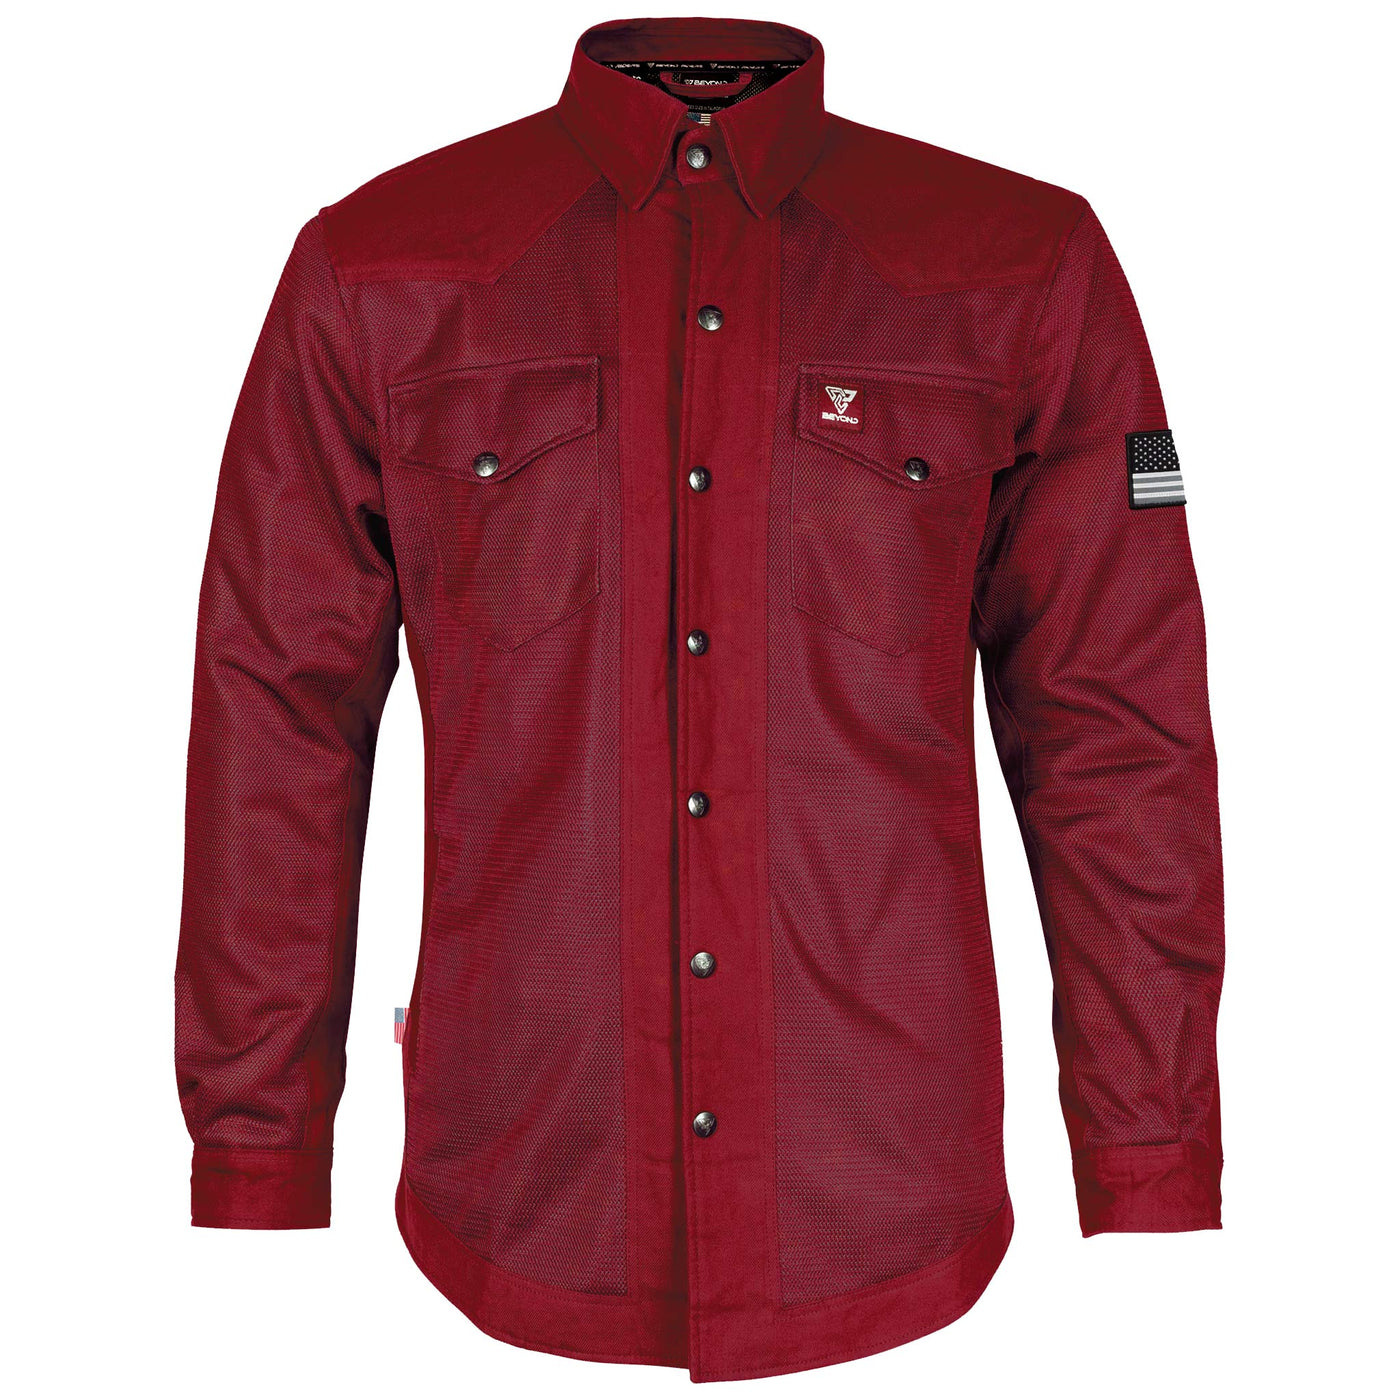 Protective Summer Mesh Shirt with Pads - Red Maroon Solid